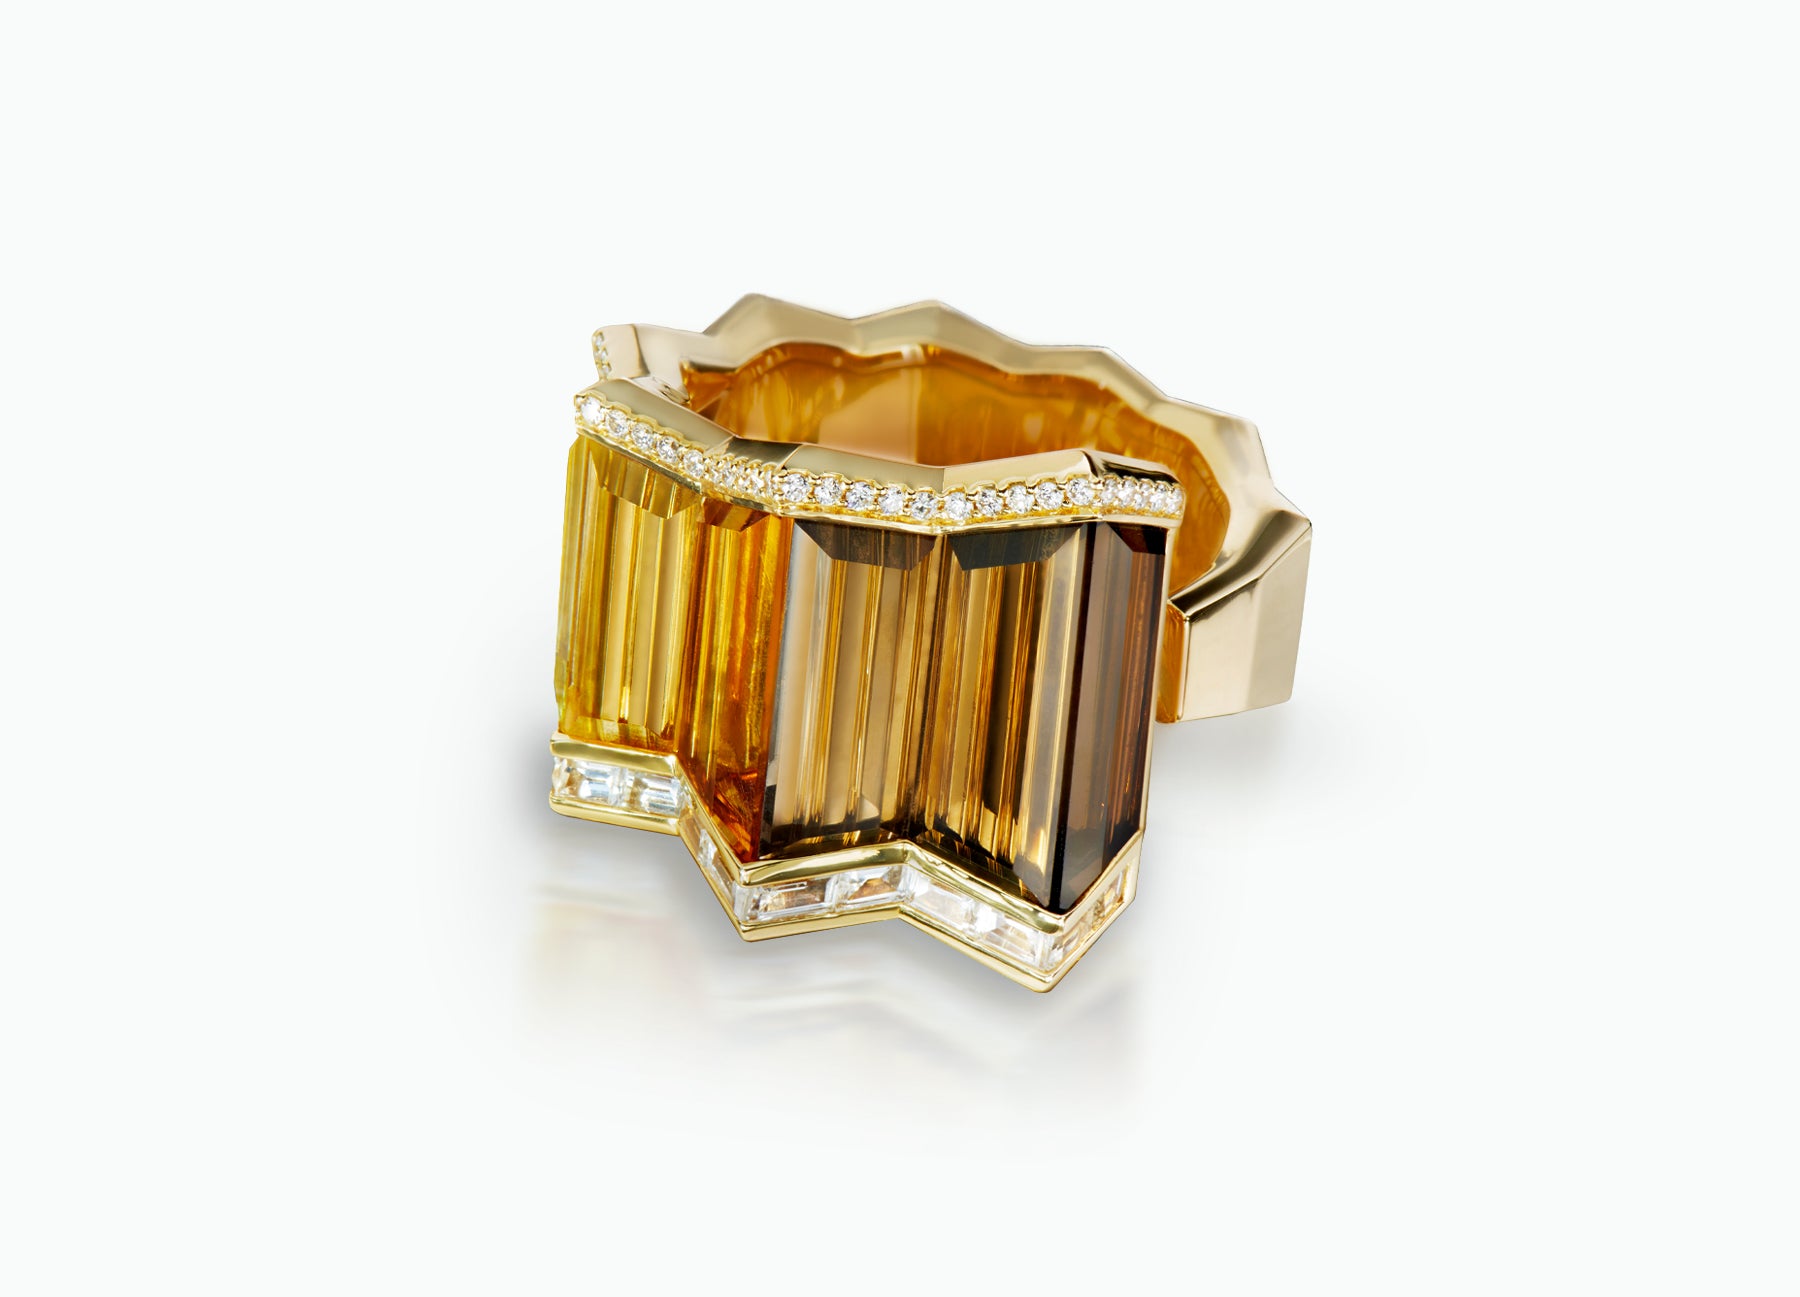 Kaleidoscope Pleat Ring crafted in 18k yellow Gold and set with smoky Quartz, Citrine, yellow Topaz, clear Crystal, white Sapphires and white Diamonds.